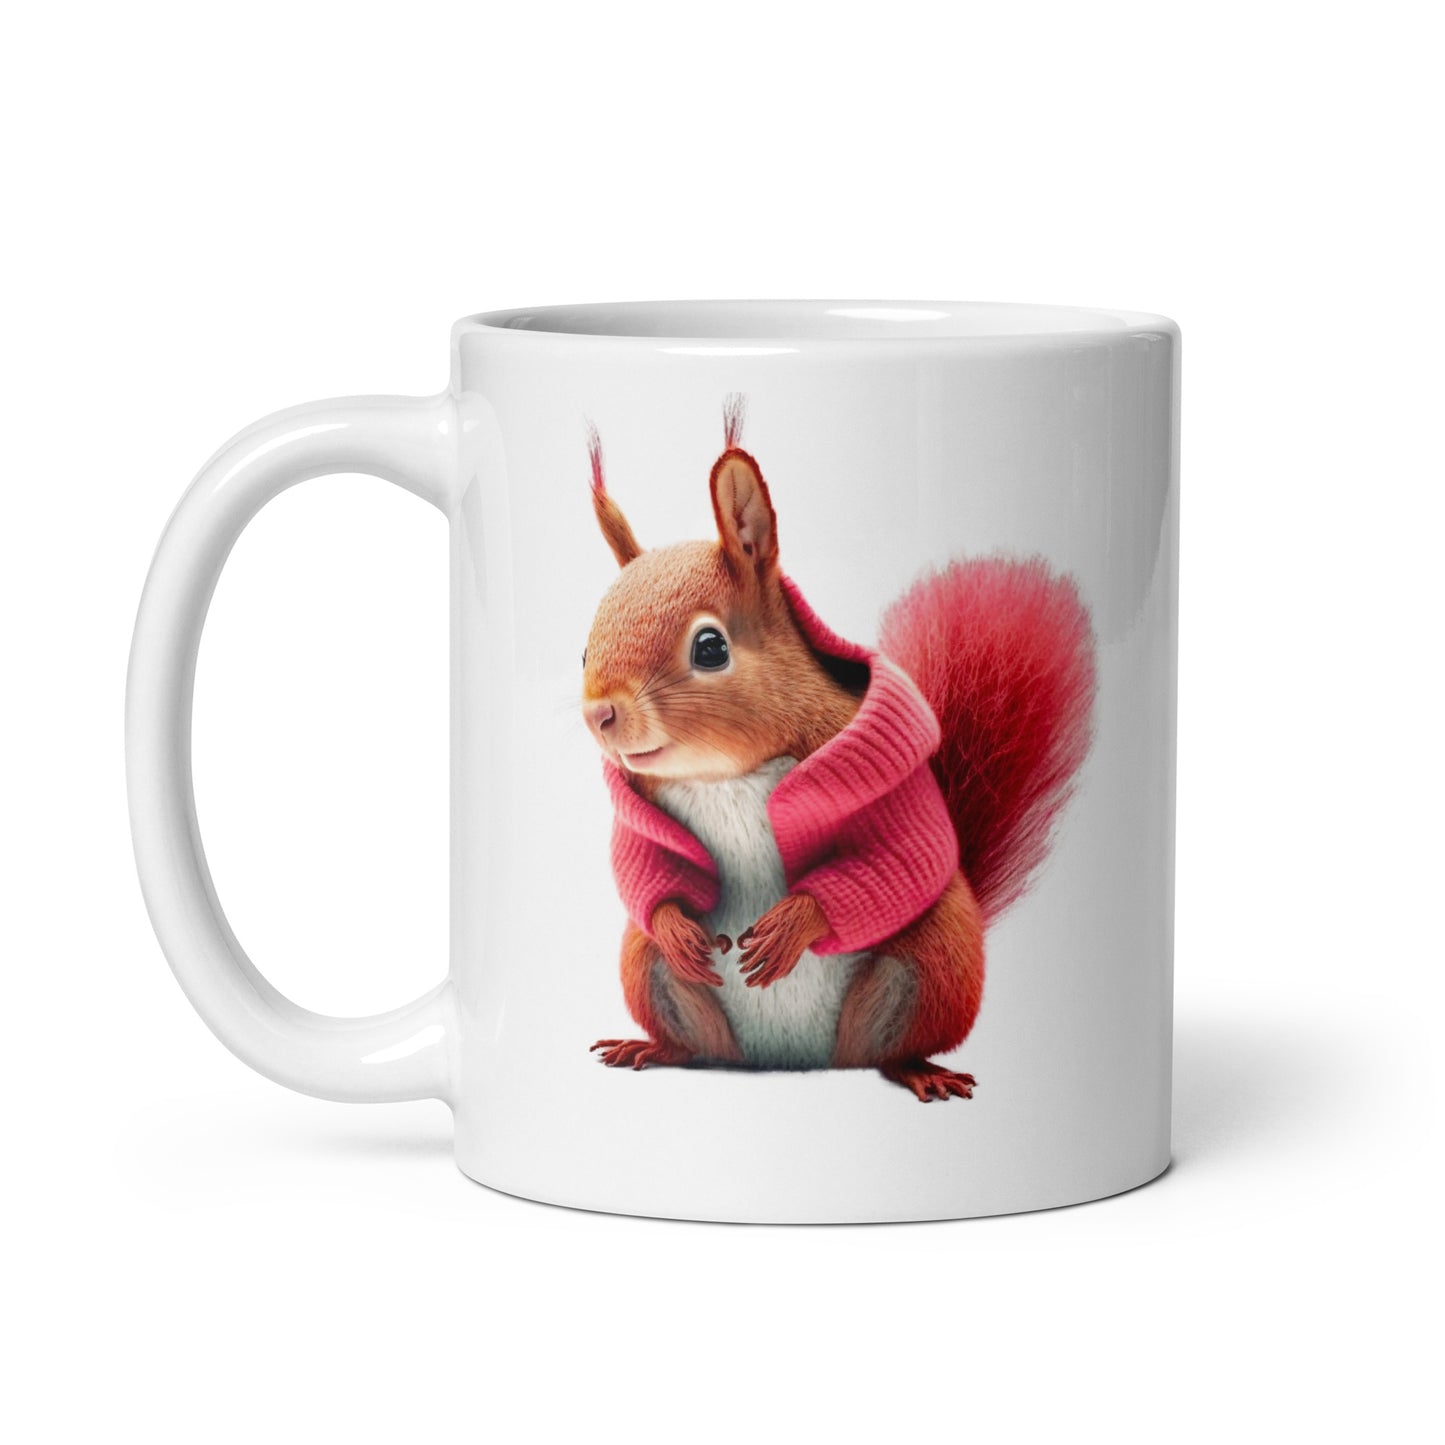 Glossy Mug Printed with a Squirrel in a Jumper.